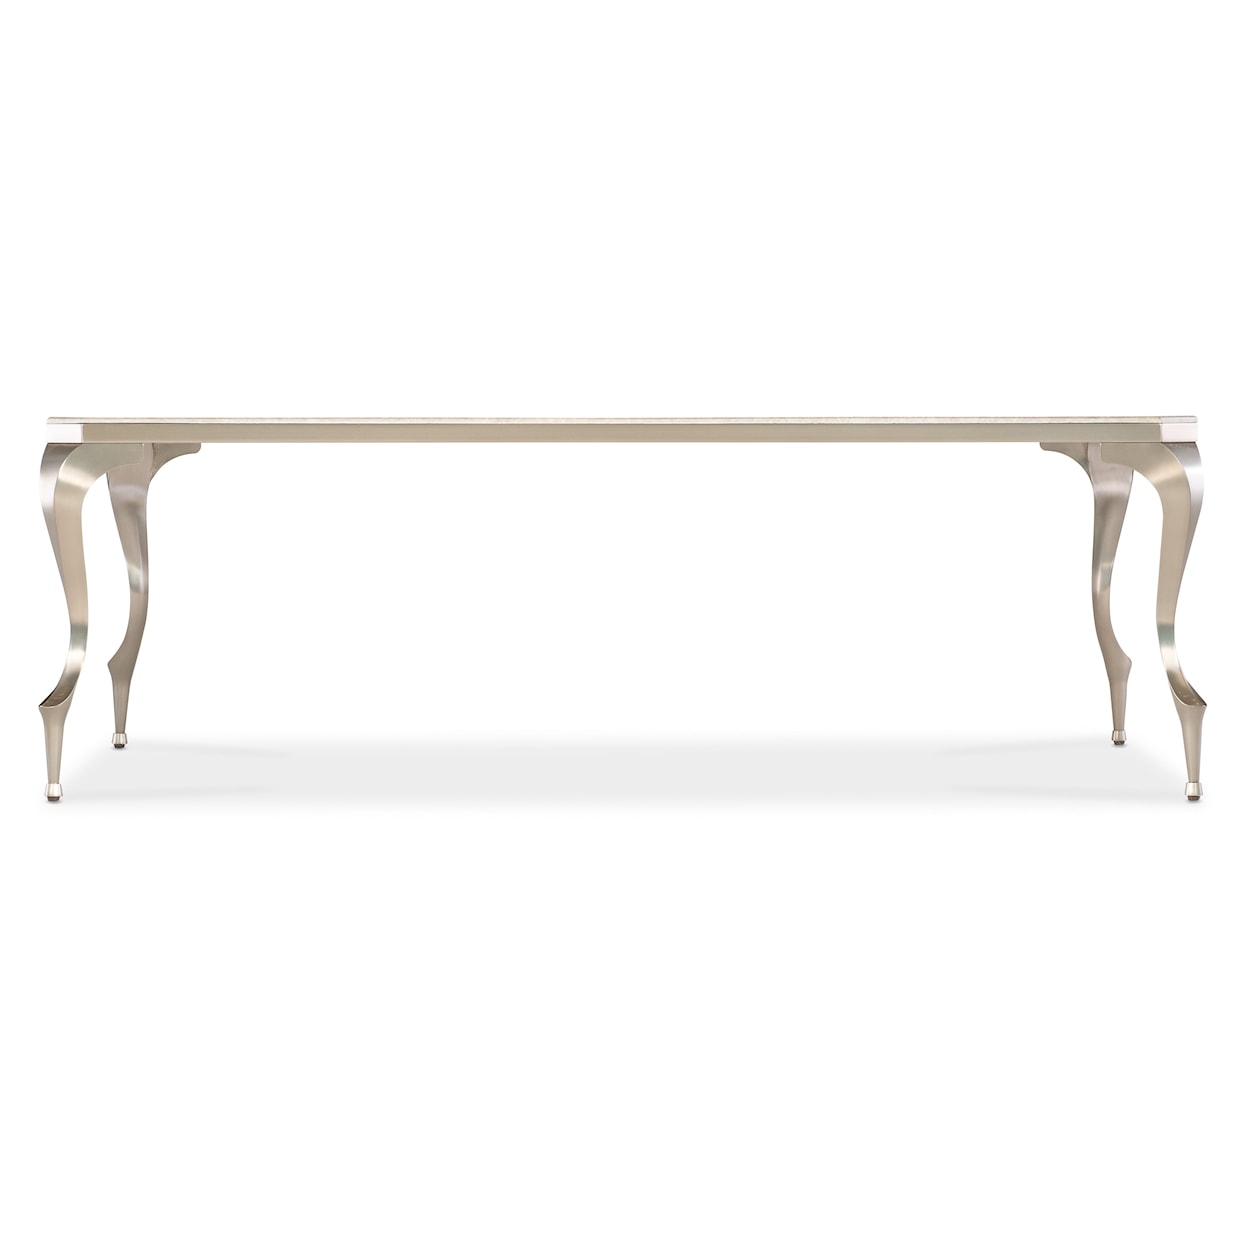 Hooker Furniture Bella Donna Stone Top Cocktail Table